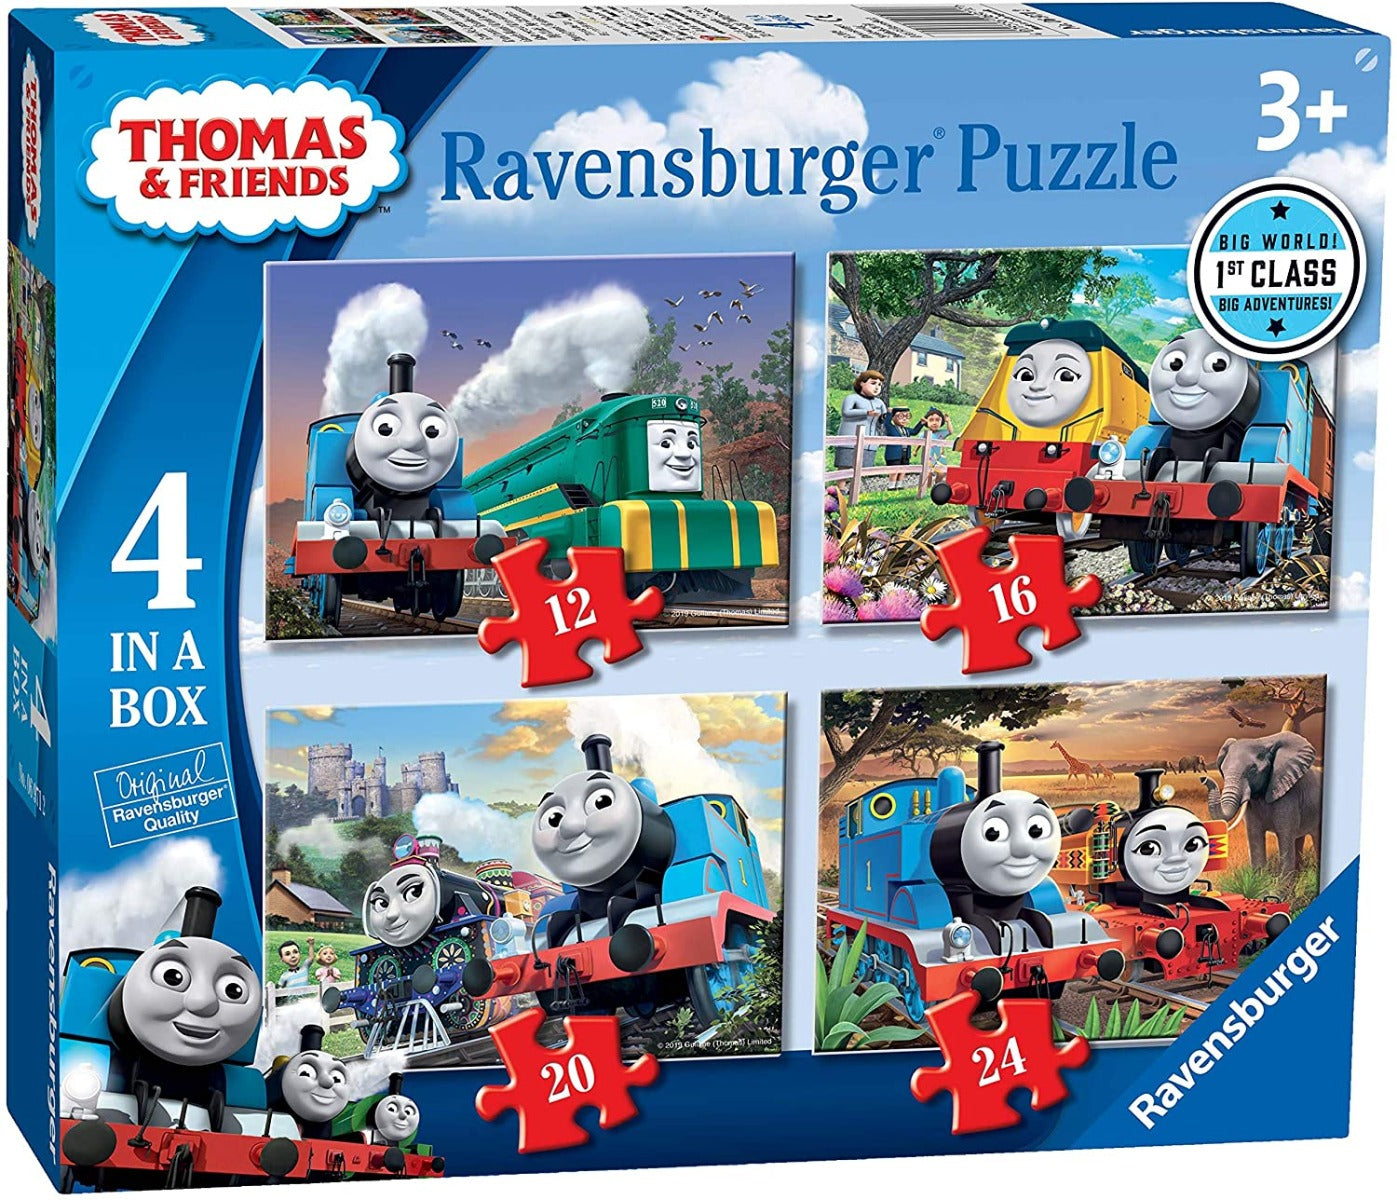 Ravensburger - Thomas & Friends Big World Adventures 4 in a Box - 12, 16, 20 and 24 Piece Jigsaw Puzzles